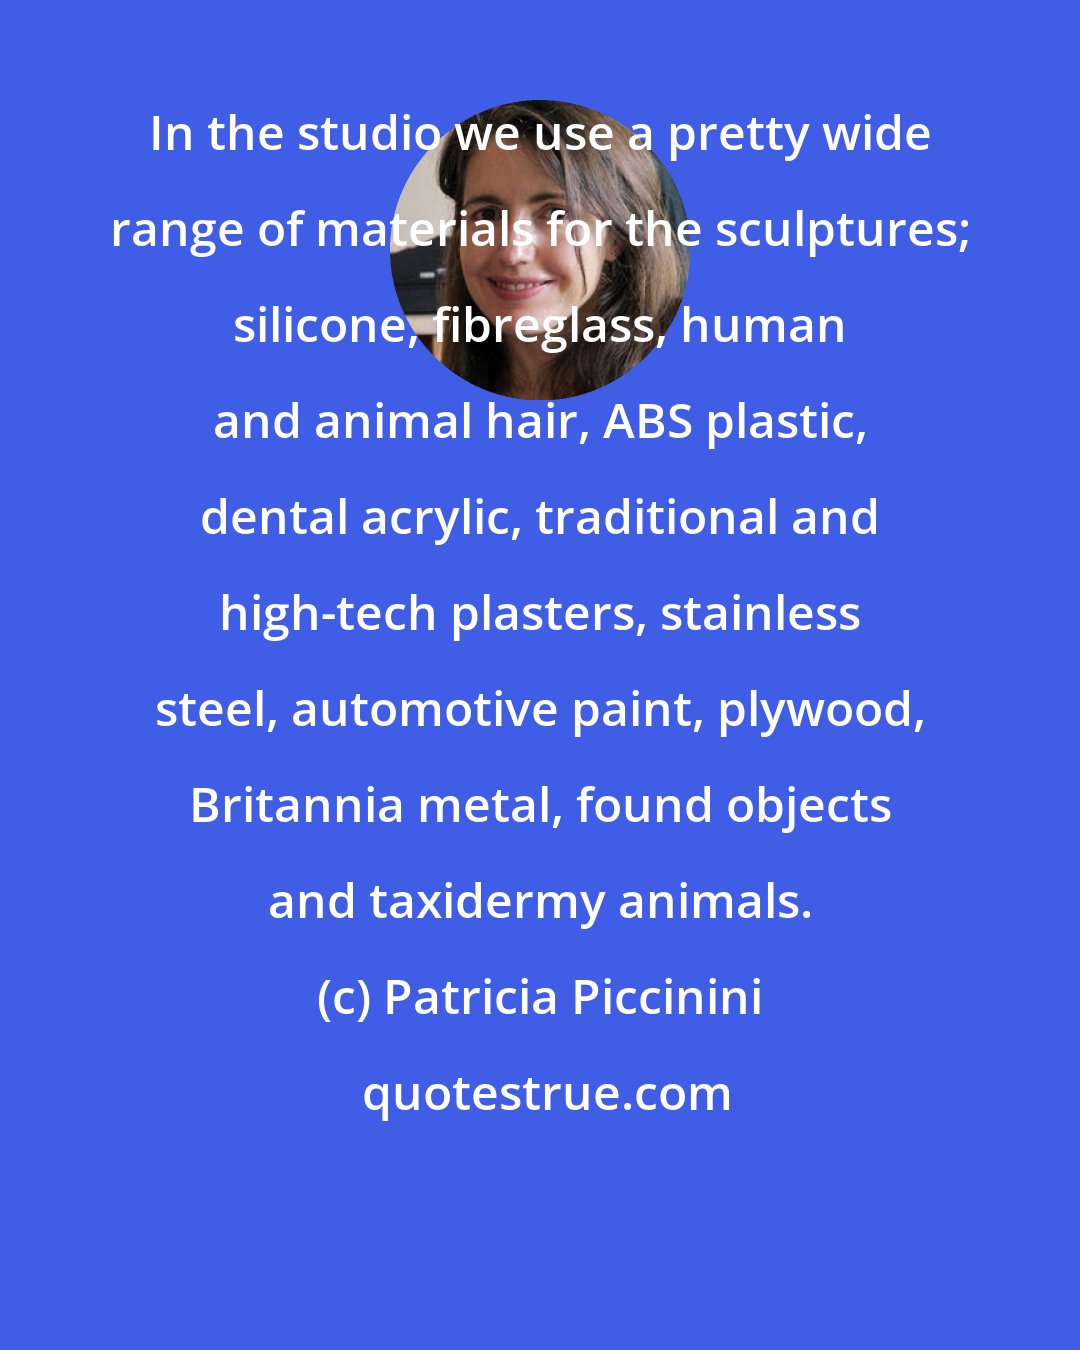 Patricia Piccinini: In the studio we use a pretty wide range of materials for the sculptures; silicone, fibreglass, human and animal hair, ABS plastic, dental acrylic, traditional and high-tech plasters, stainless steel, automotive paint, plywood, Britannia metal, found objects and taxidermy animals.